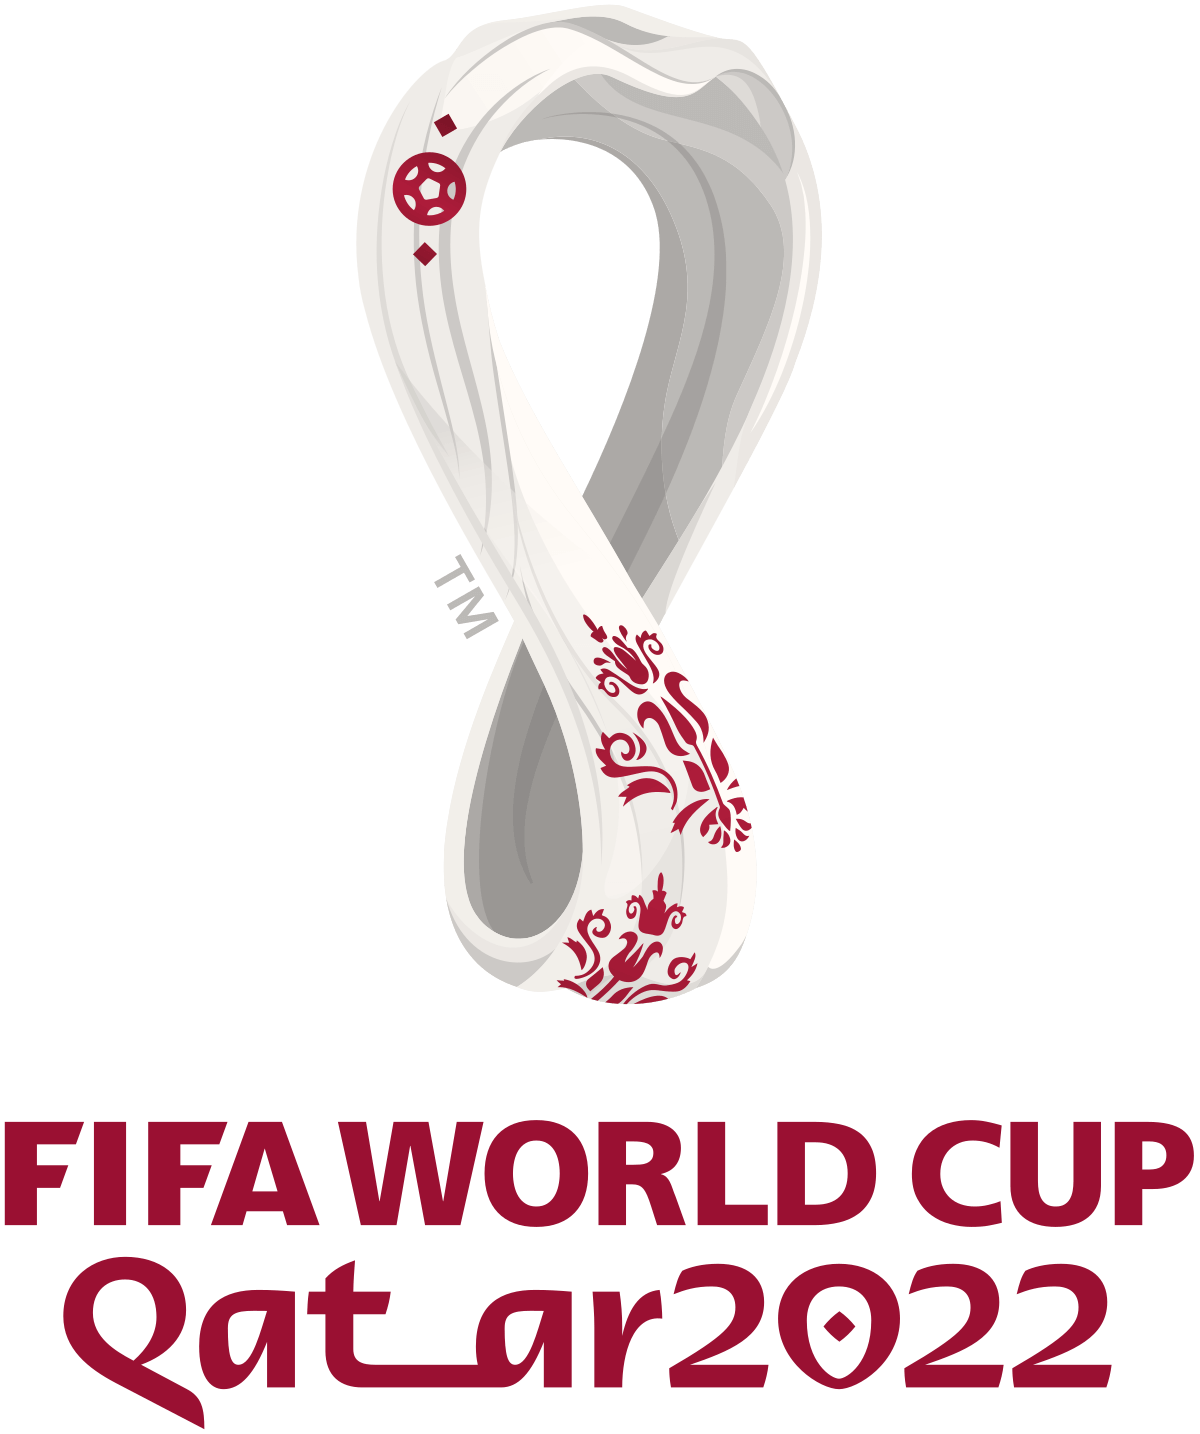 Let's take a look at emblems of each WC before 2022 logo unveiled